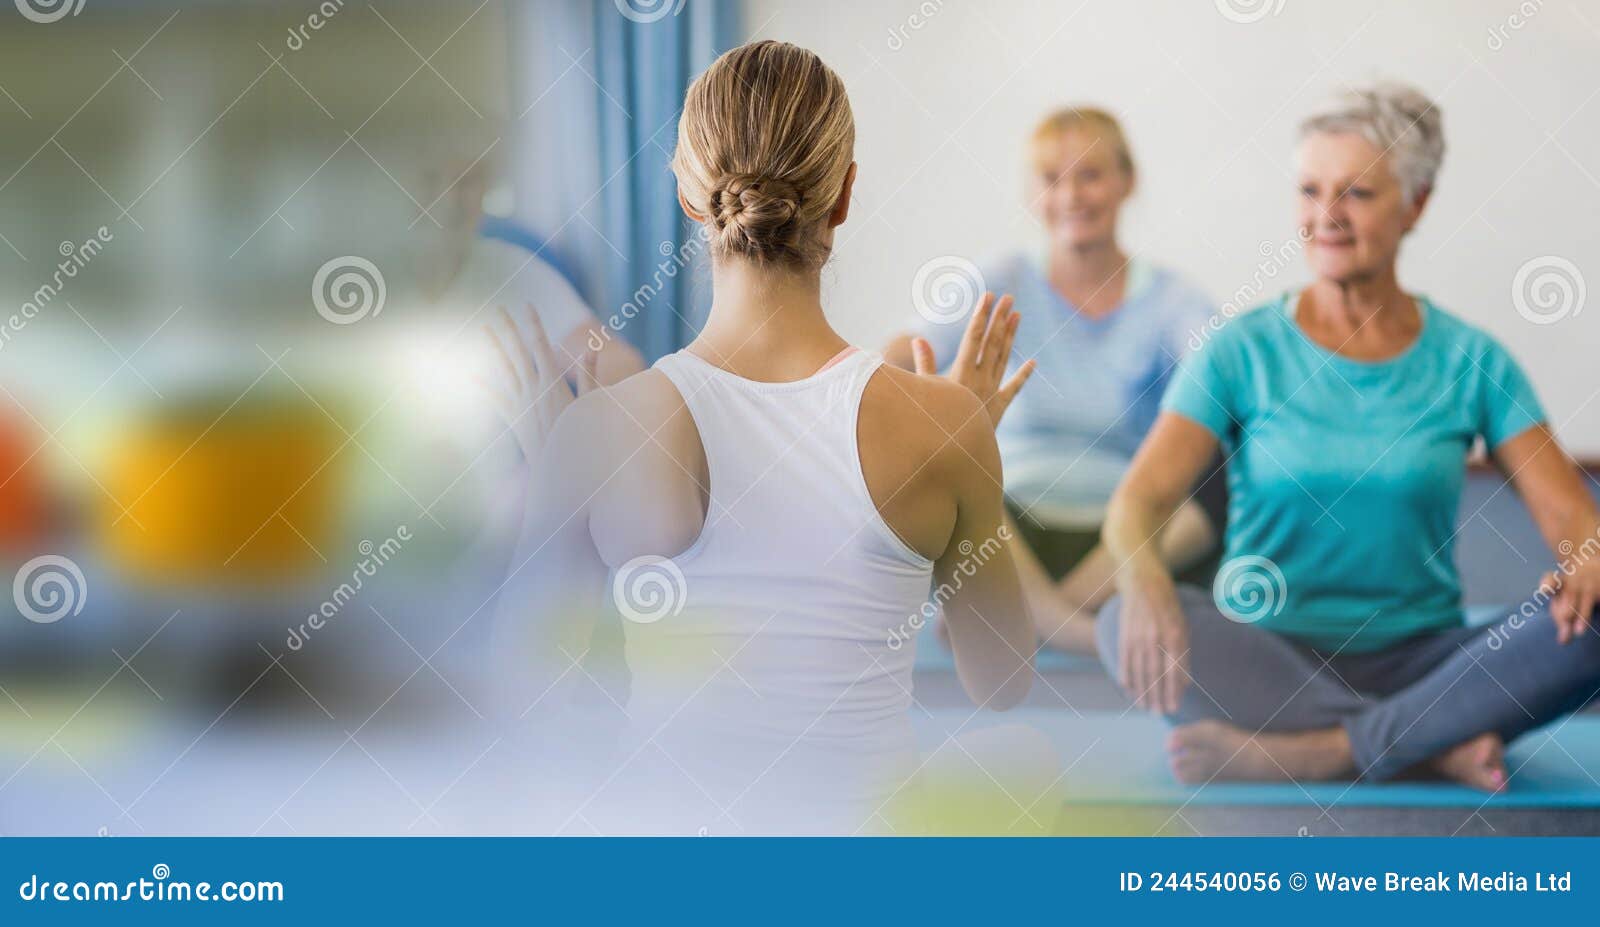 Blur Effect with Copy Space Against Female Yoga Trainer and Group of ...